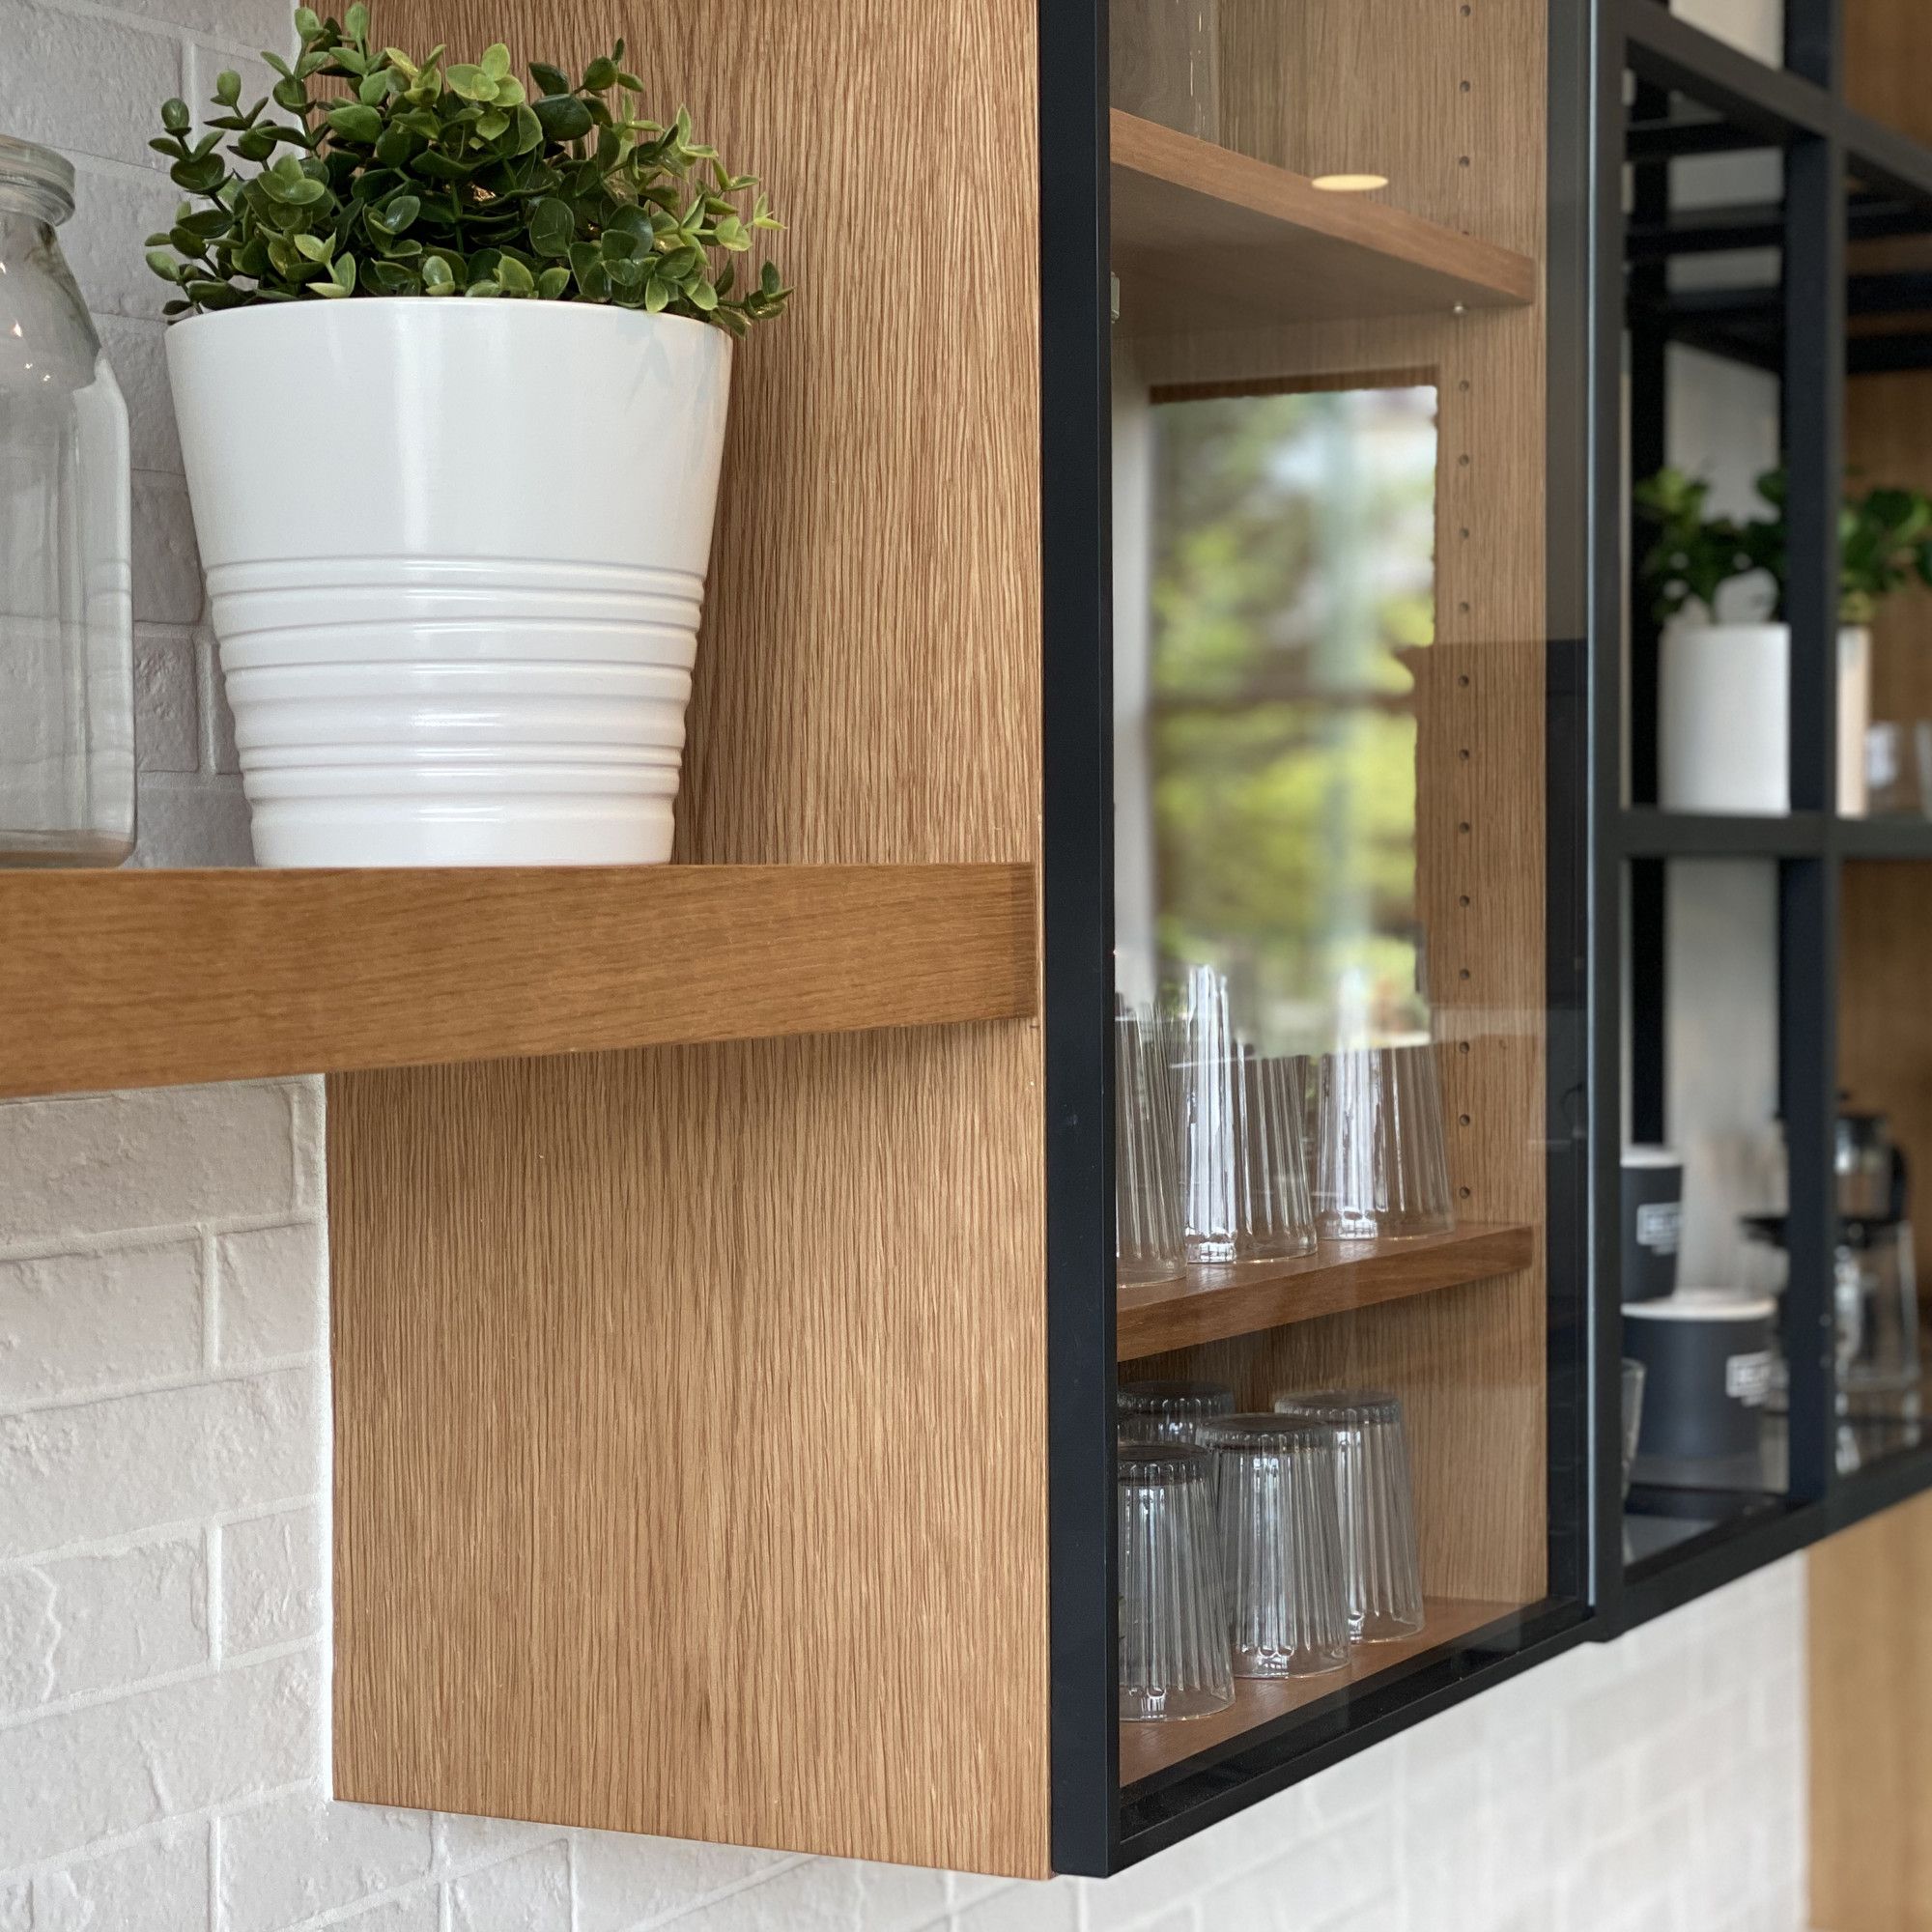 Modern wood kitchen cabinets with black trim and glass fronts